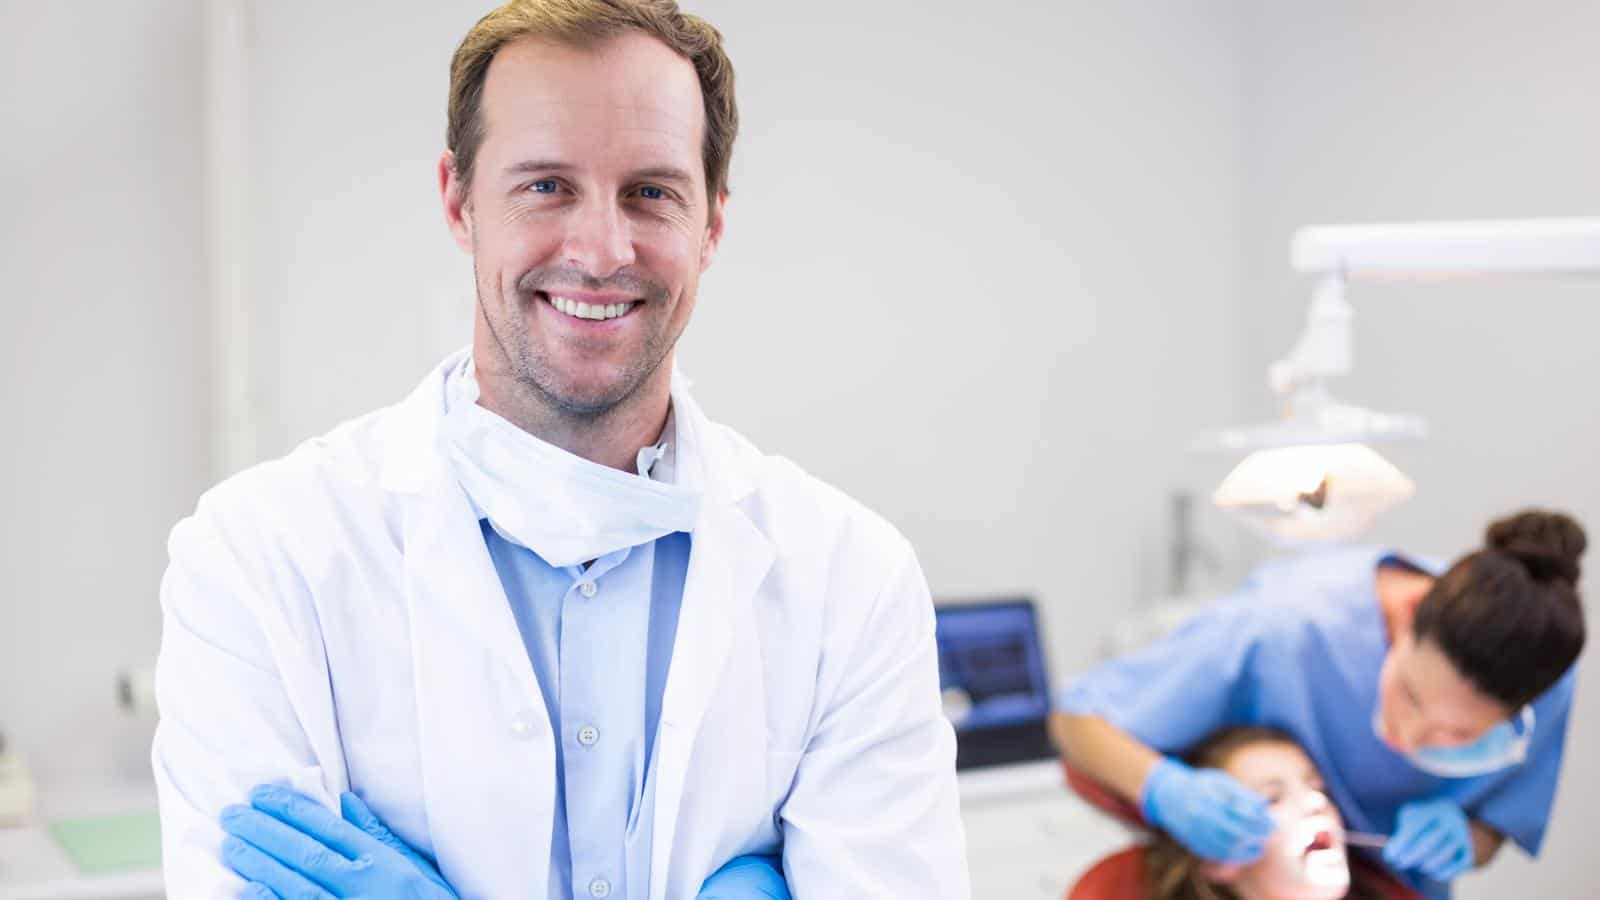 <p>An orthodontist specializes in diagnosing and treating dental and facial irregularities. The job has a very high average salary of $208,000 and a low stress tolerance score of 67. To become an orthodontist, a person has to have a medical degree and specialized training.</p>